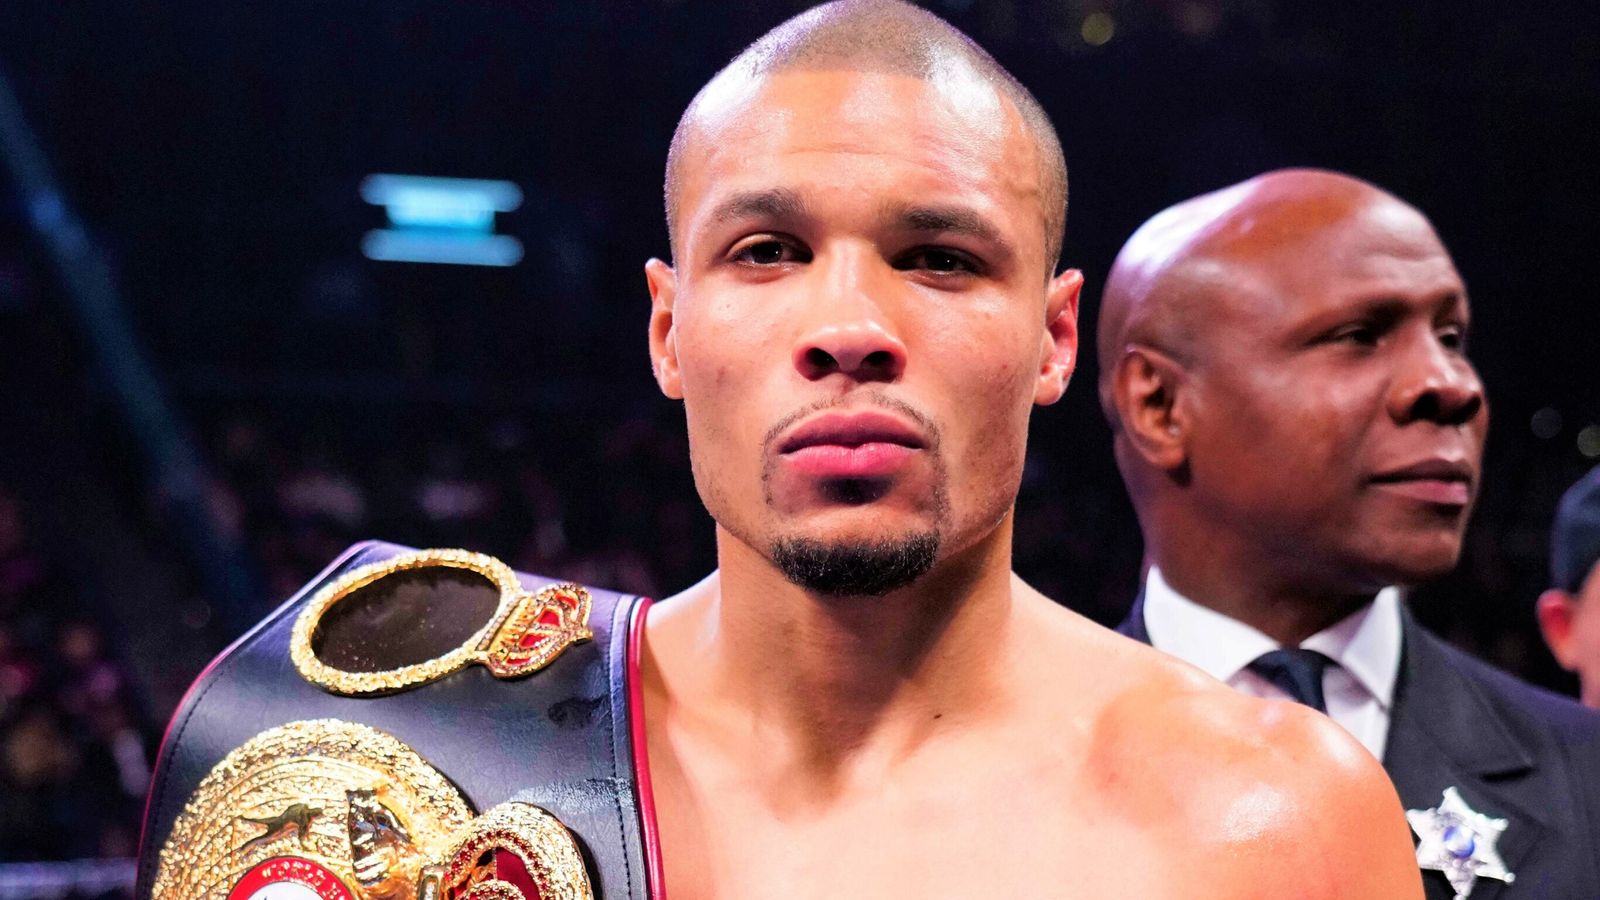 Chris Eubank Jr is guaranteed world title action as promoter Kalle Sauerland hints at massive plans for this year